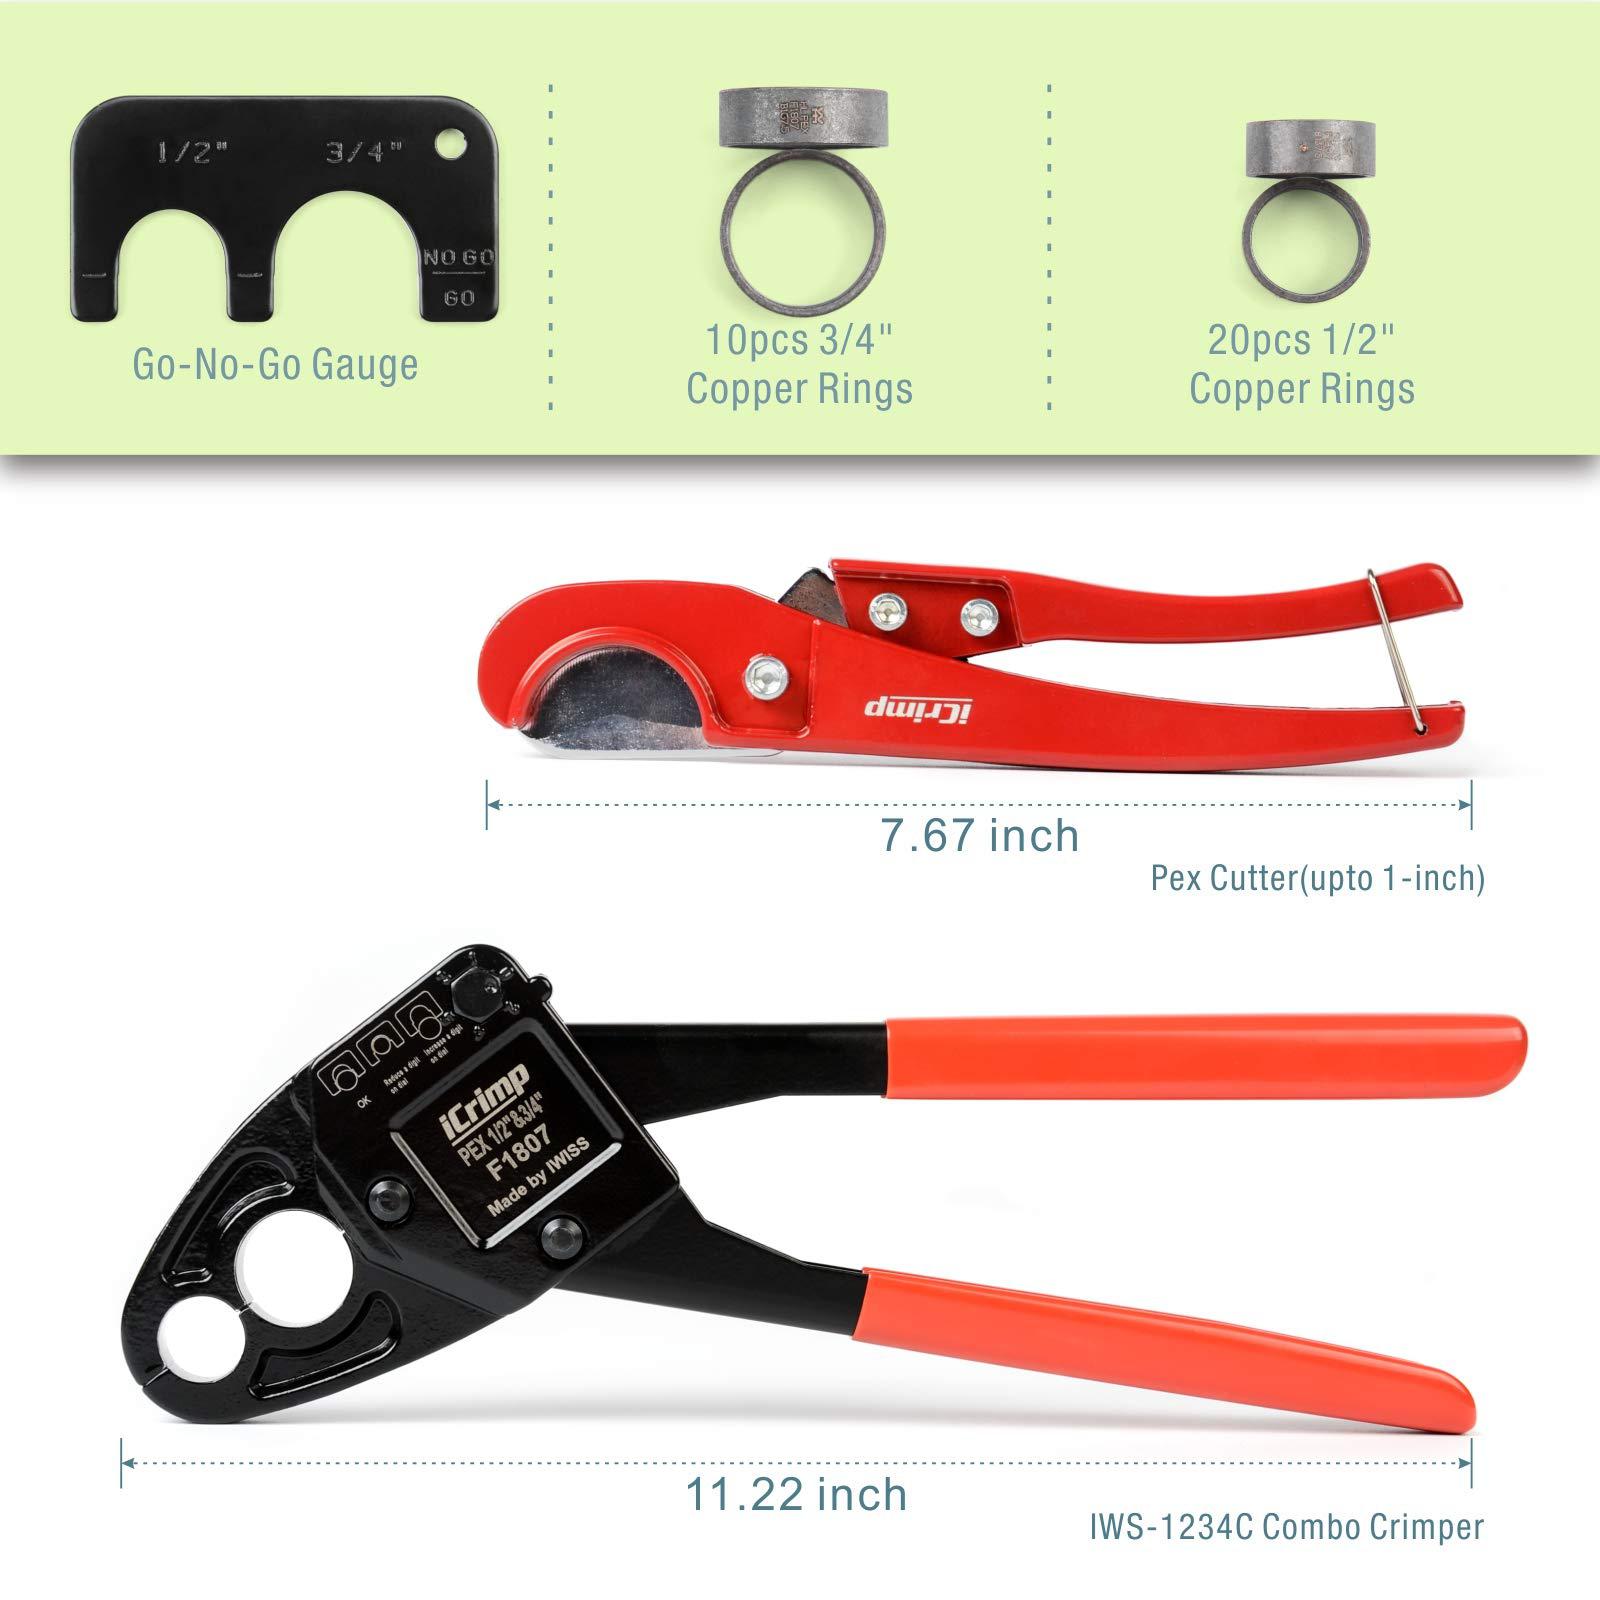 Iwiss icrimp angle head f1807 pex pipe crimping tool for copper rings - iws-1234w(1/2&3/4-inchcombo crimper kit)